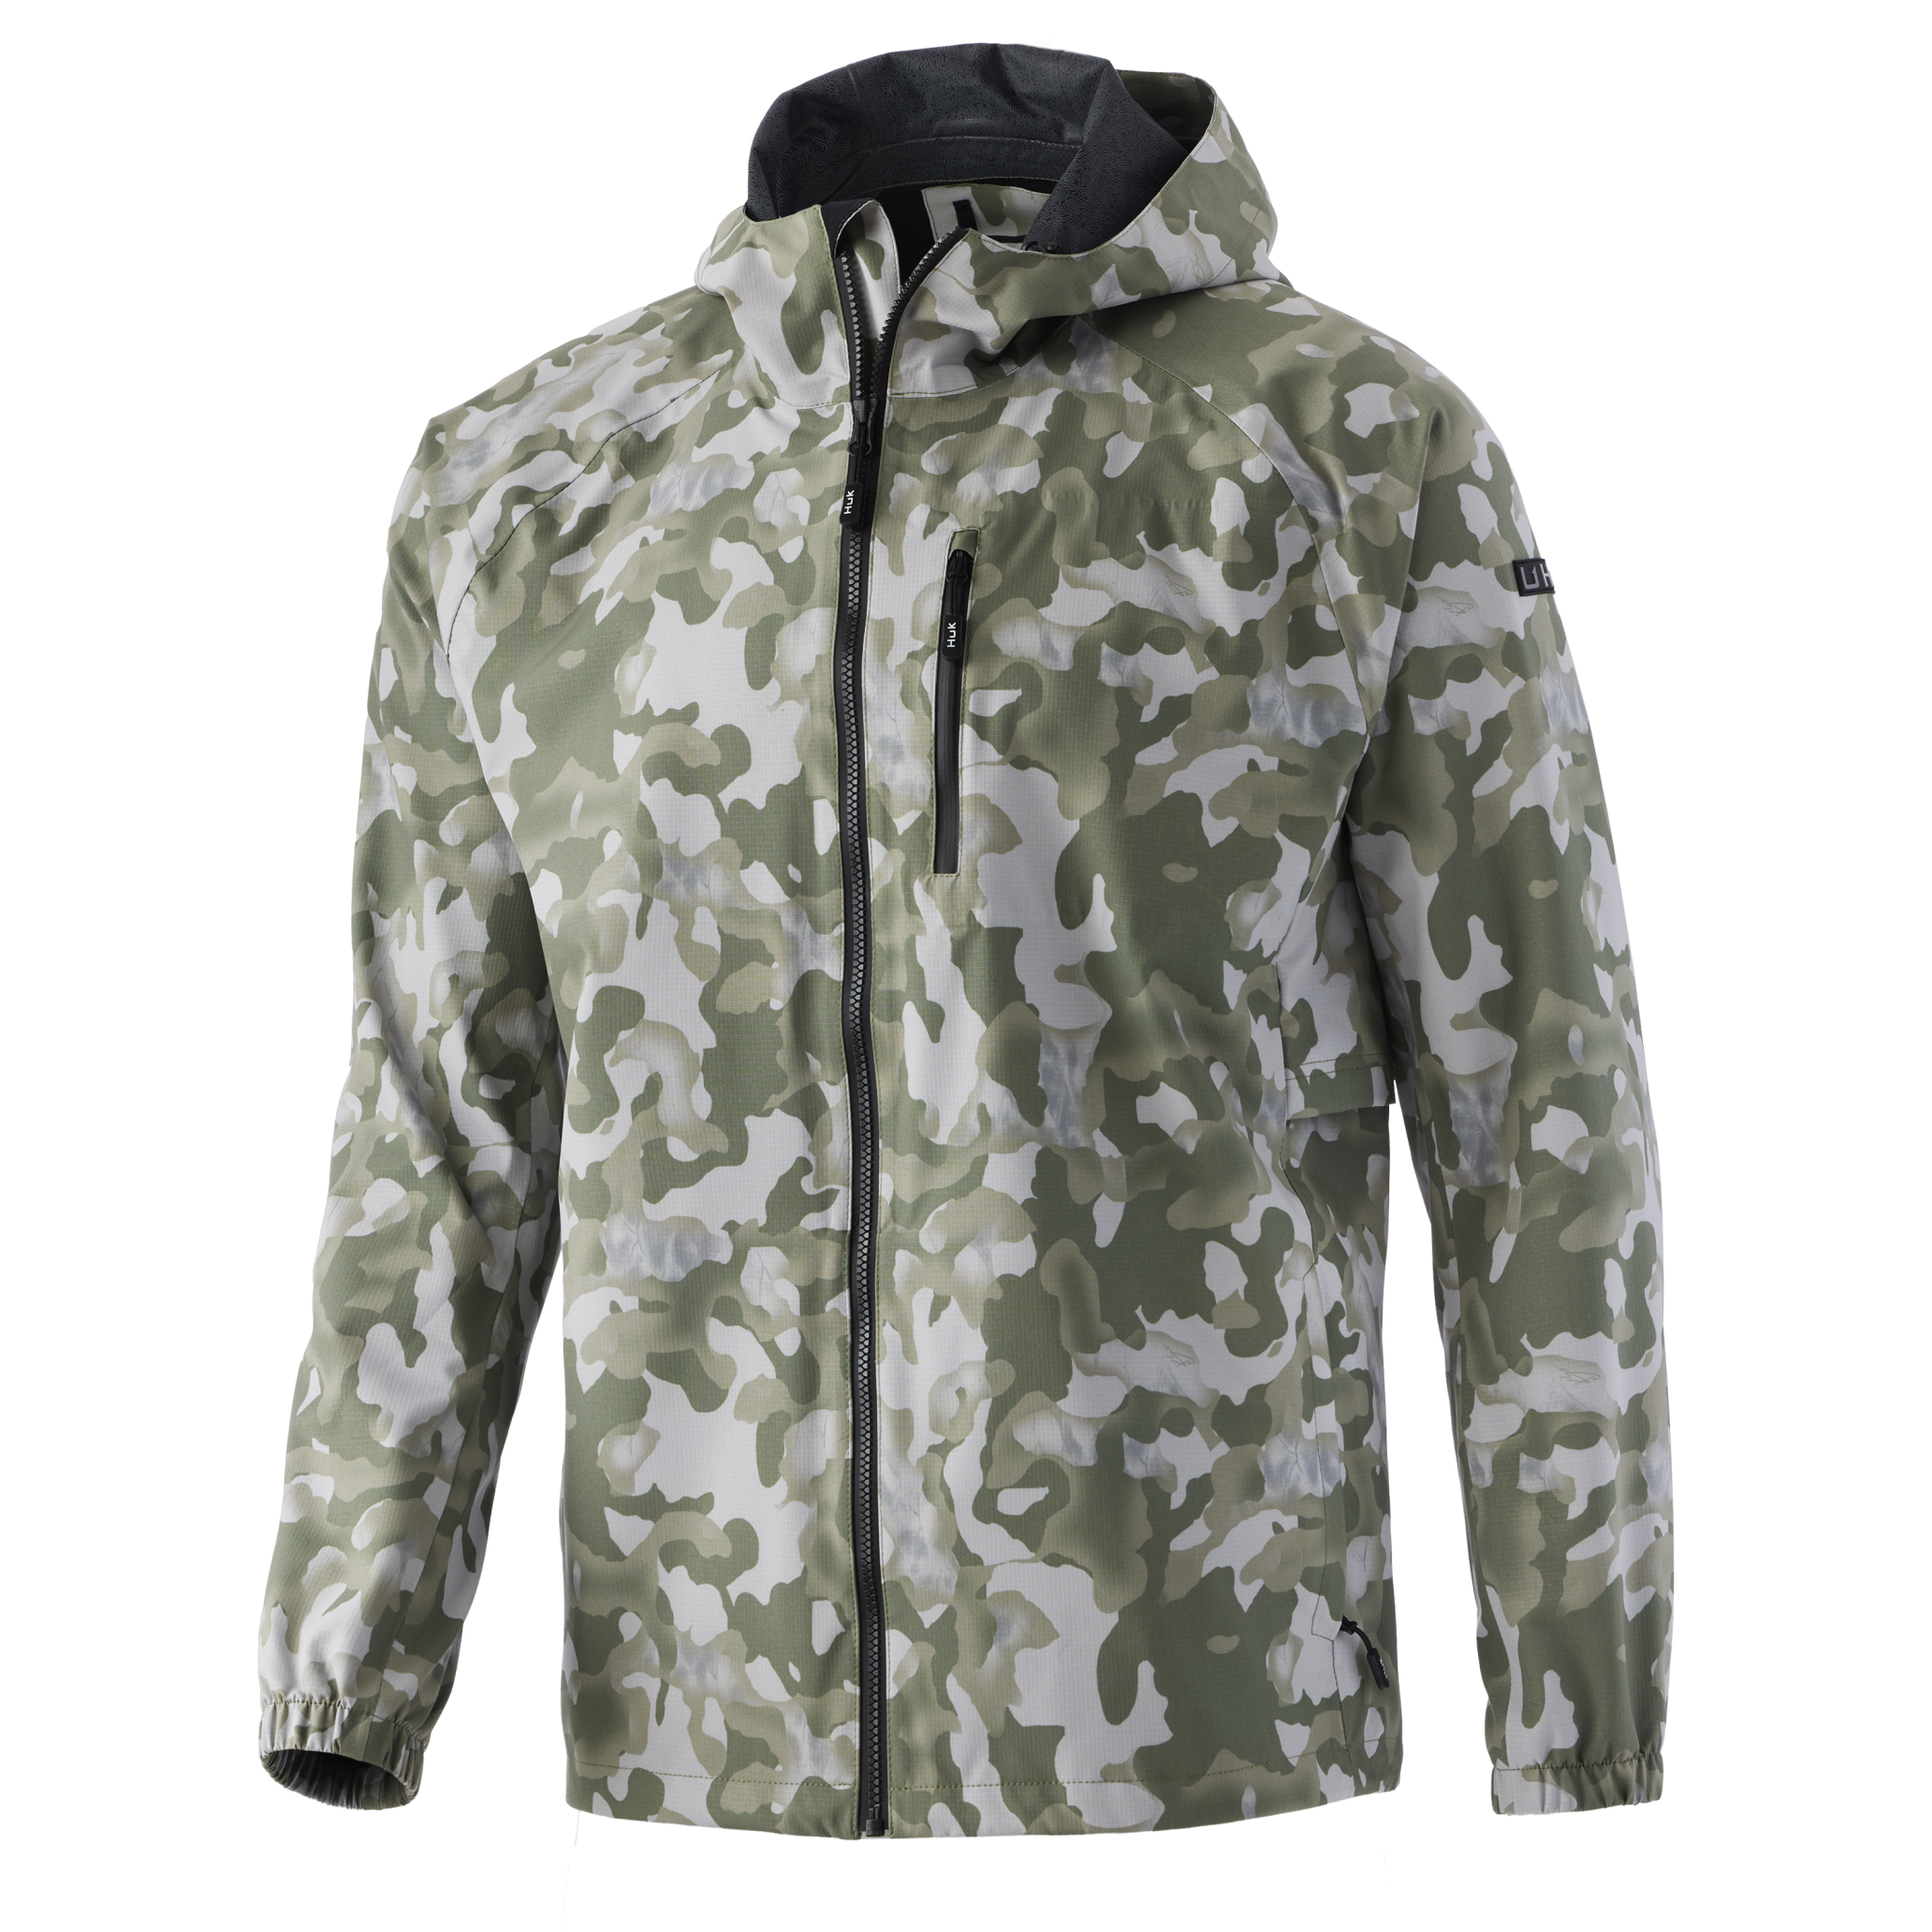 Huk's New Rover Jacket Keeps Anglers Covered In Unpredictable Weather –  Anglers Channel